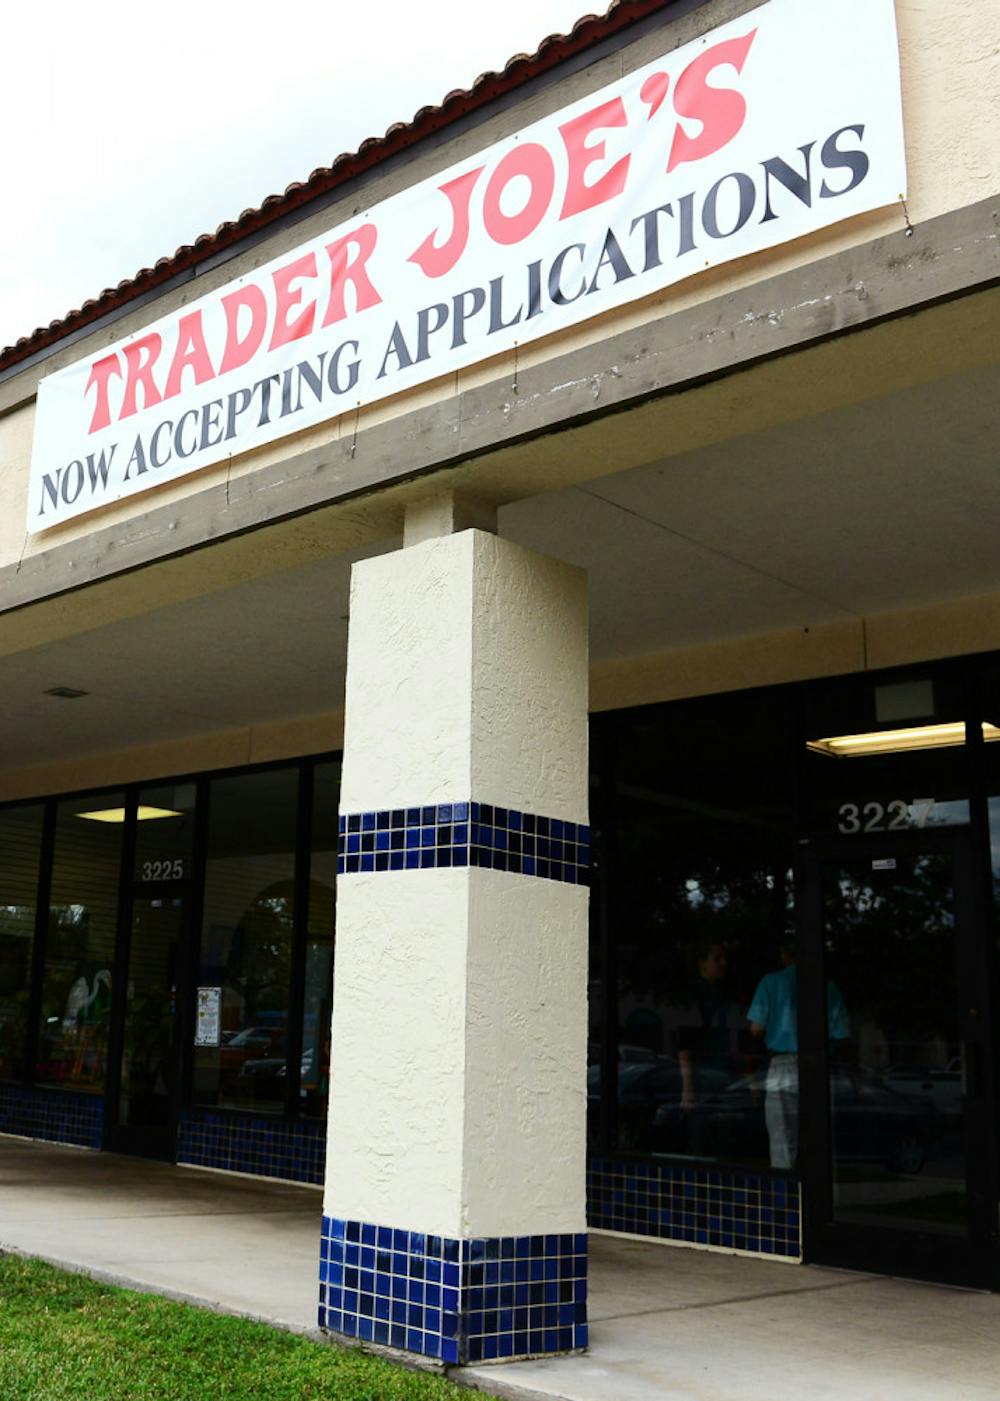 <p>Trader Joe’s is now accepting applications at the Butler Plaza Shopping Center near Picture This!</p>